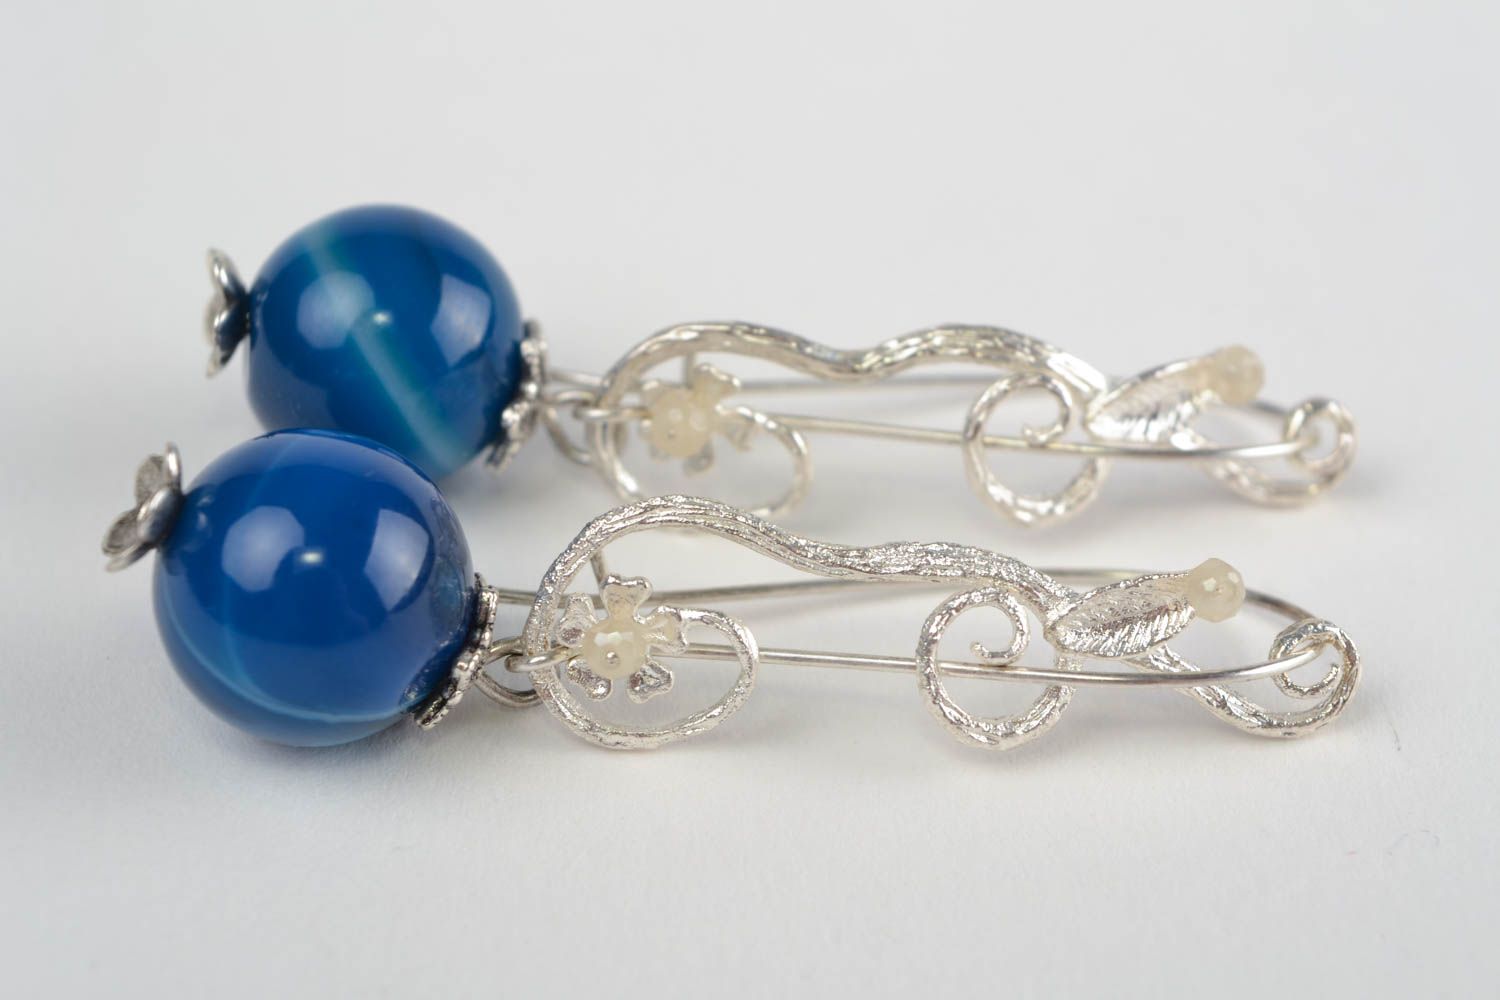 Handmade dangling earrings with silver colored fittings and blue agate beads photo 2